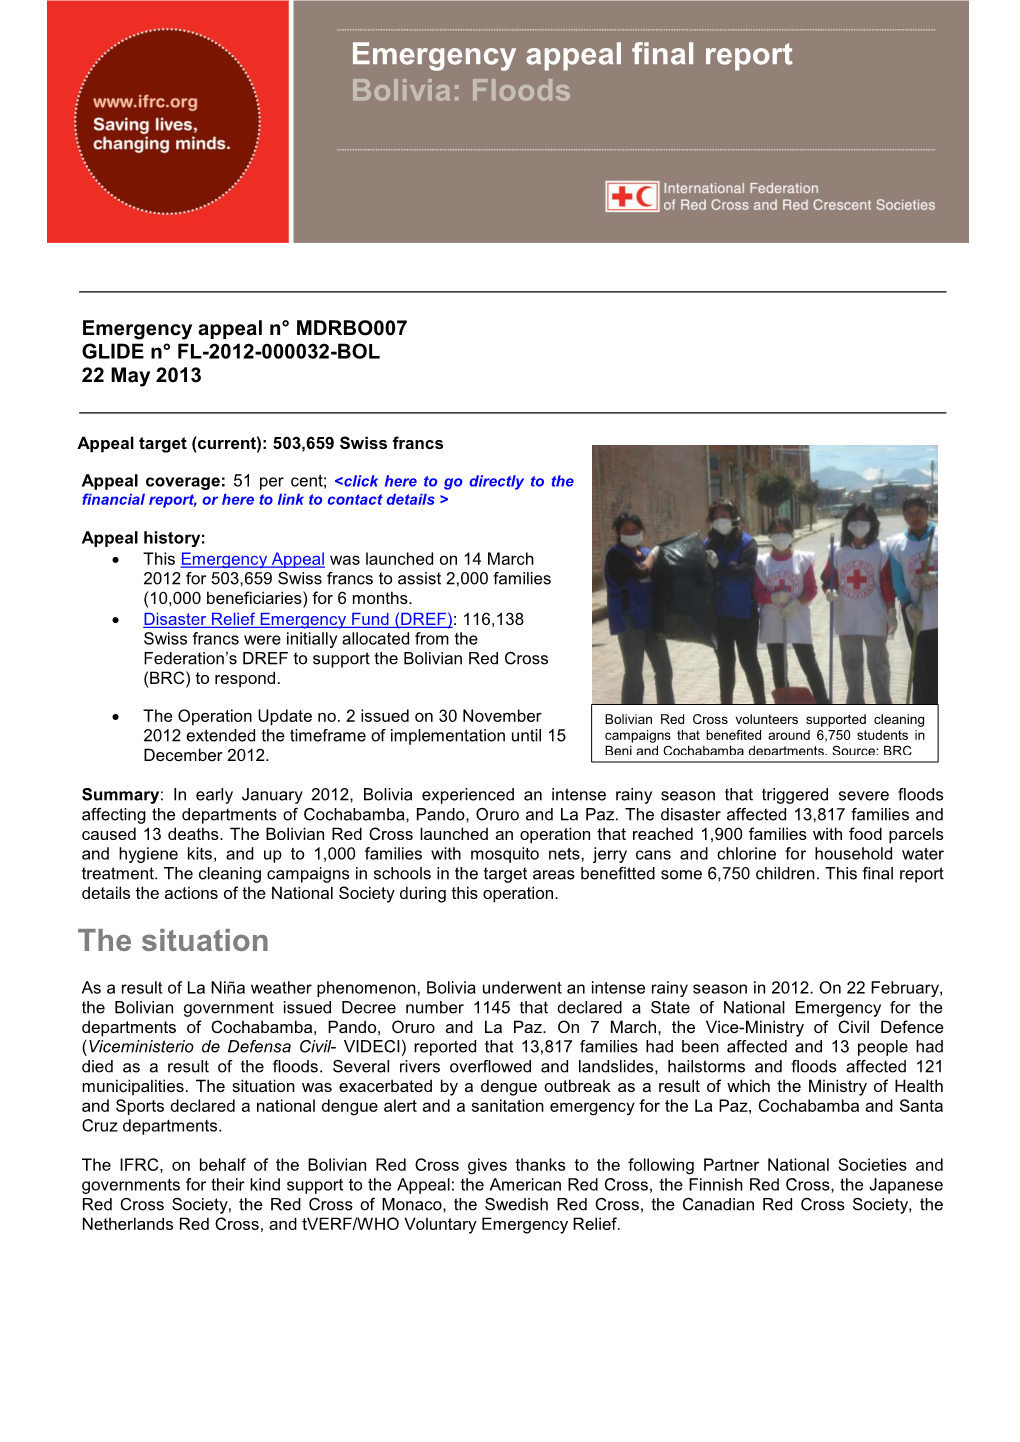 The Situation Emergency Appeal Final Report Bolivia: Floods